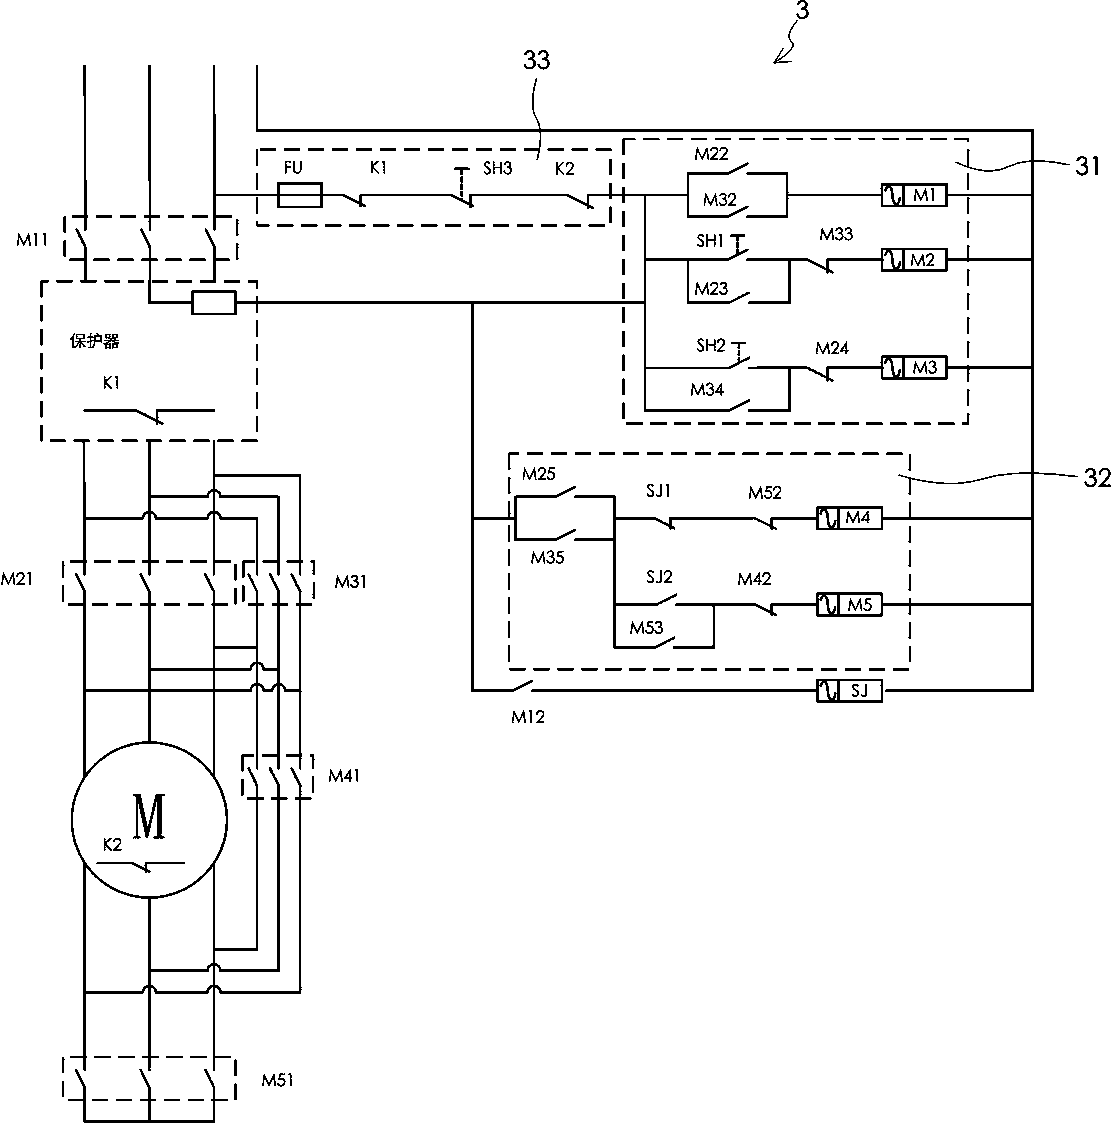 Method for transforming three-phase asynchronous motor into permanent magnet motor